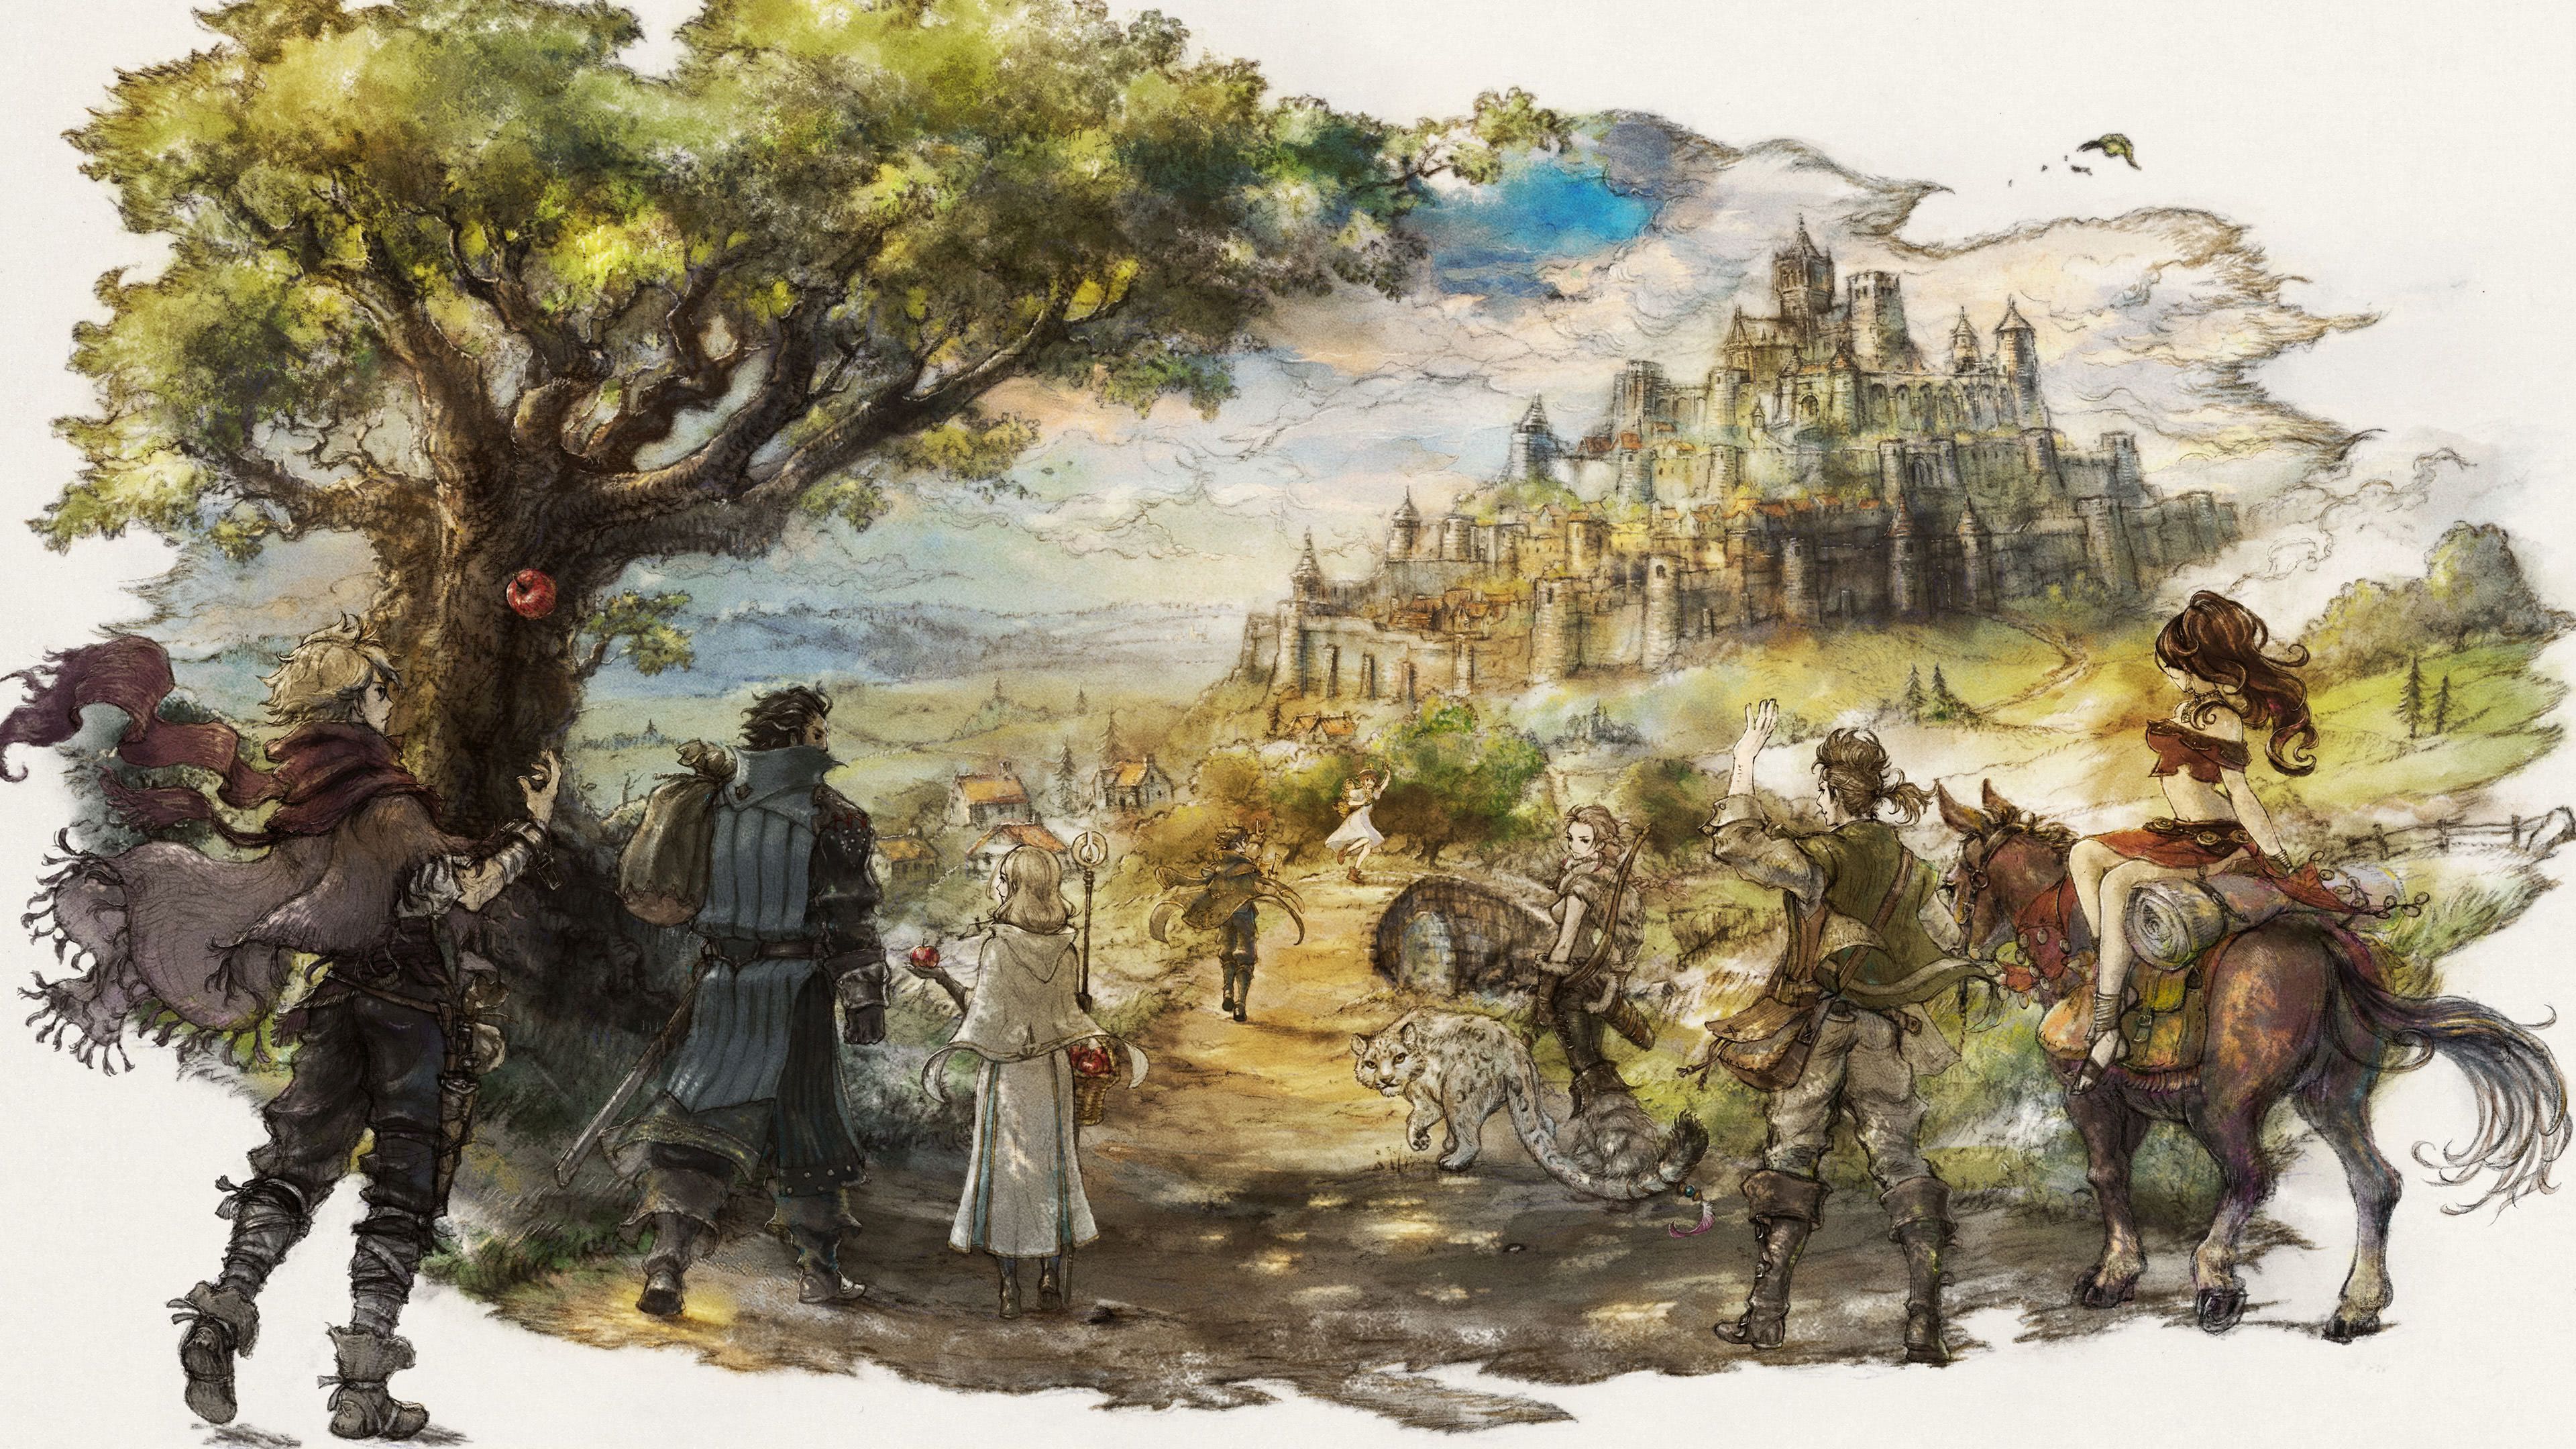 Octopath Traveler News - Trailers and More...